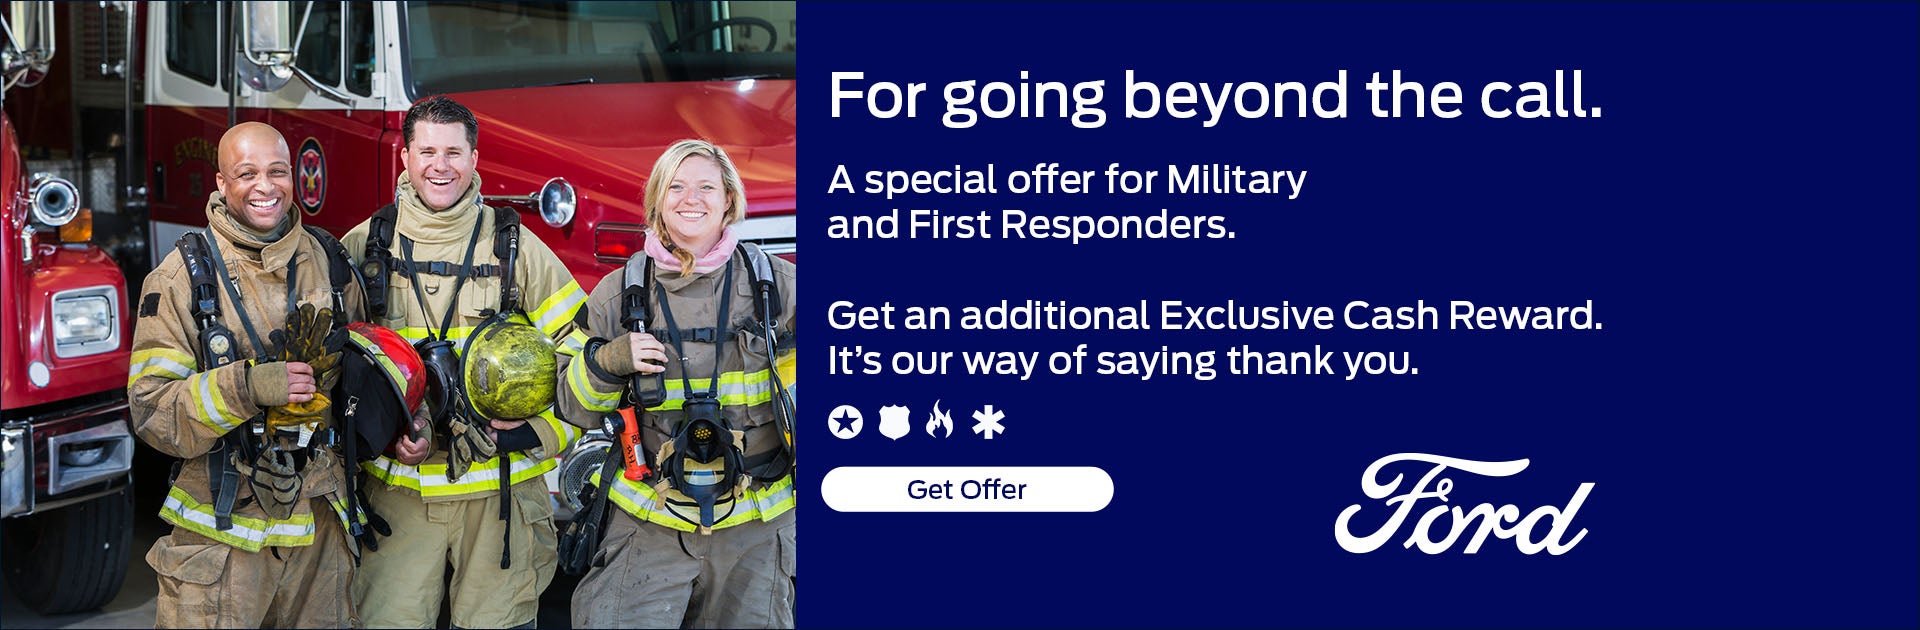 military and first responder1